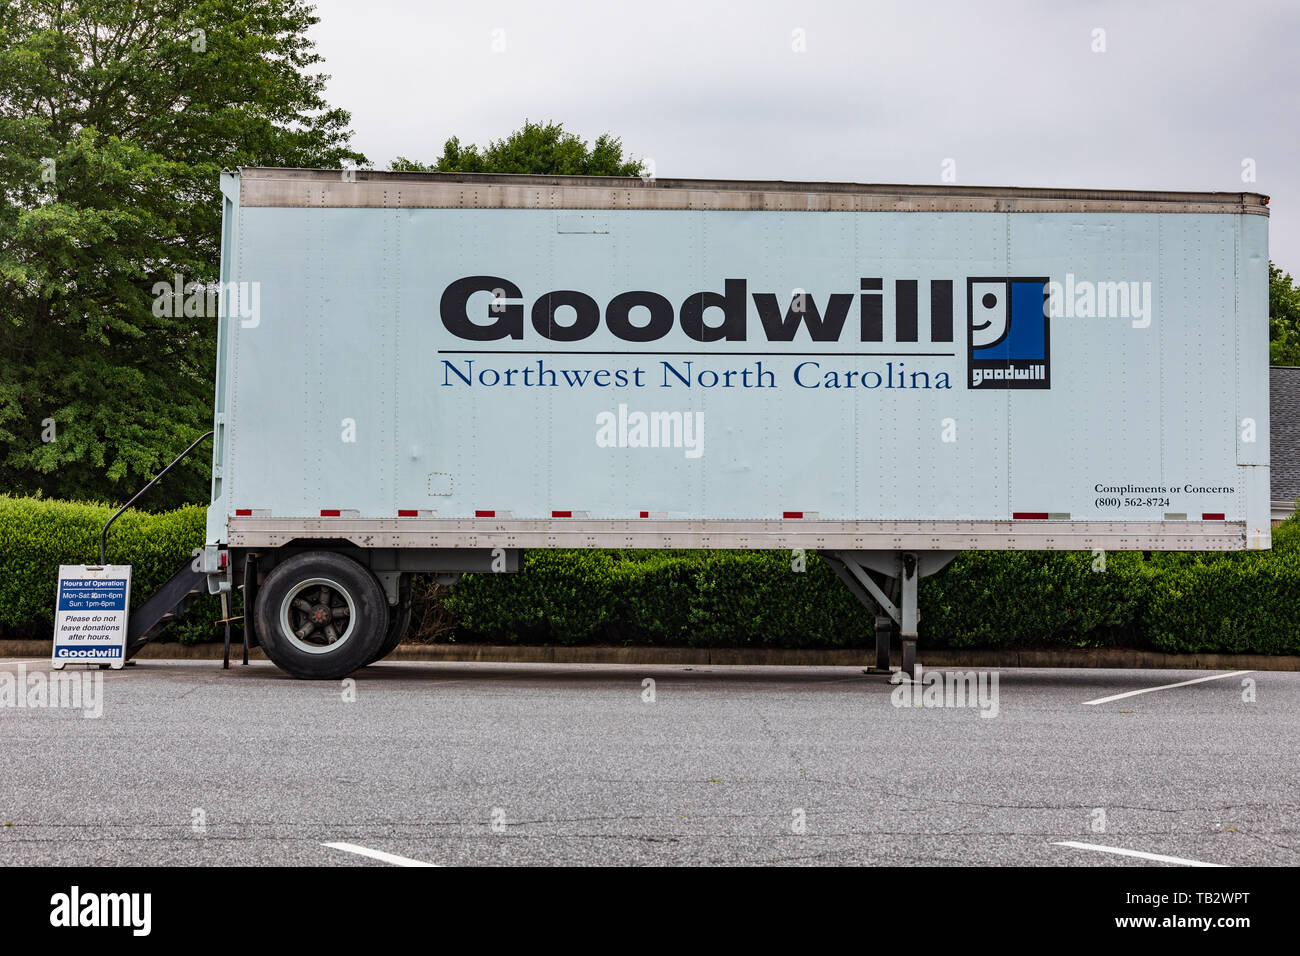 NEWTON, NC, USA--5/22/19: A Goodwill Industries trailer serving as a donation point for used and usable goods. Stock Photo